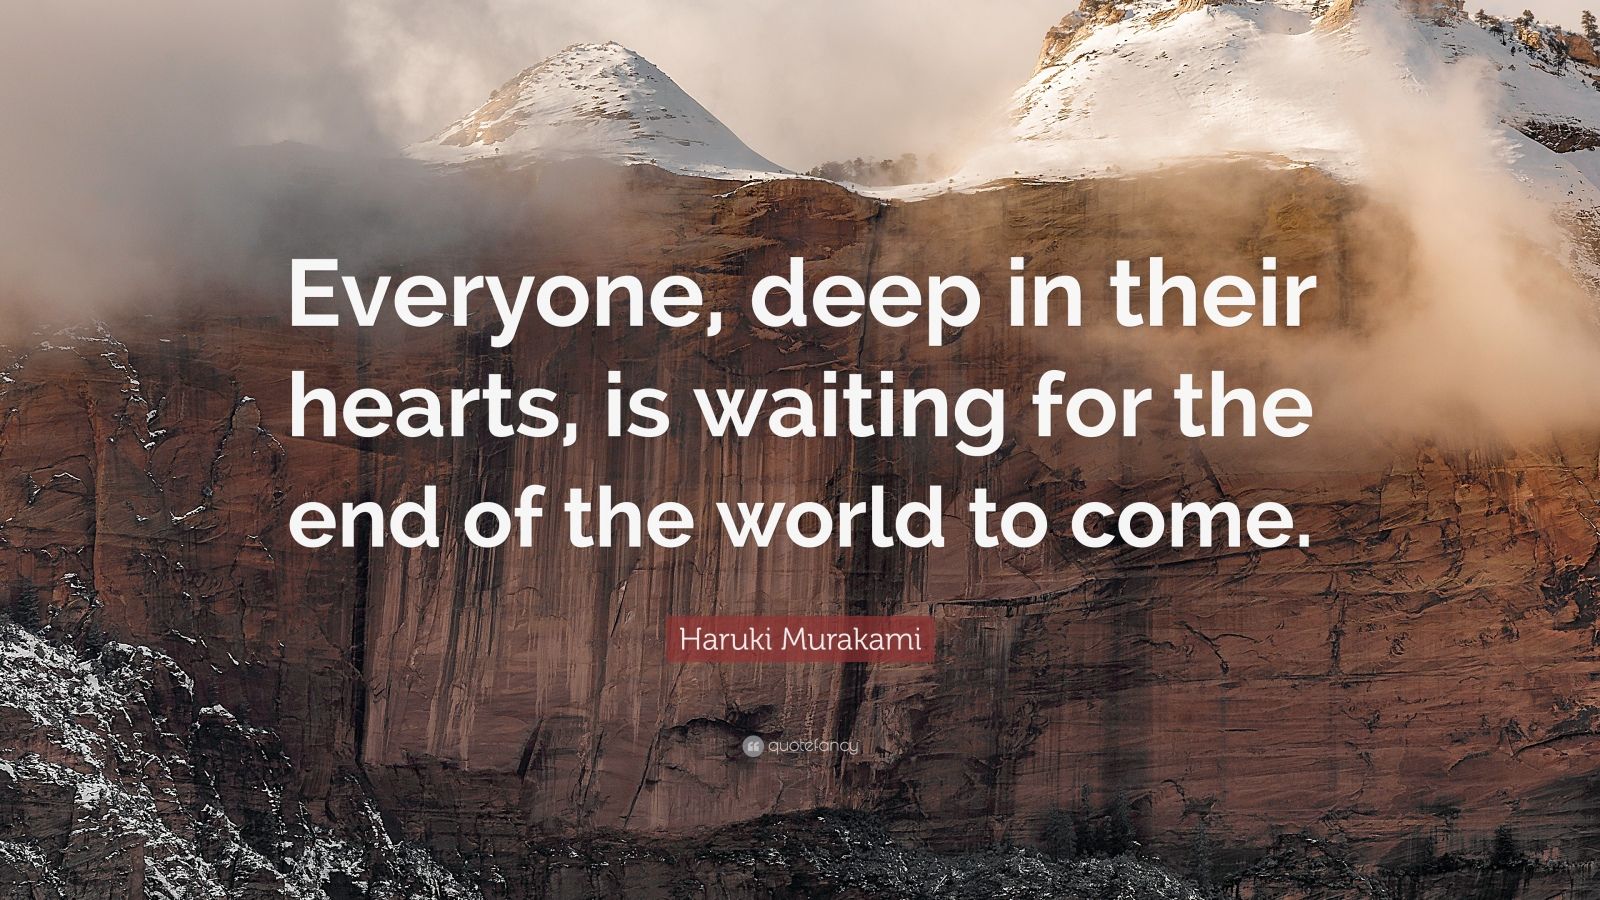 1717561 Haruki Murakami Quote Everyone deep in their hearts is waiting for